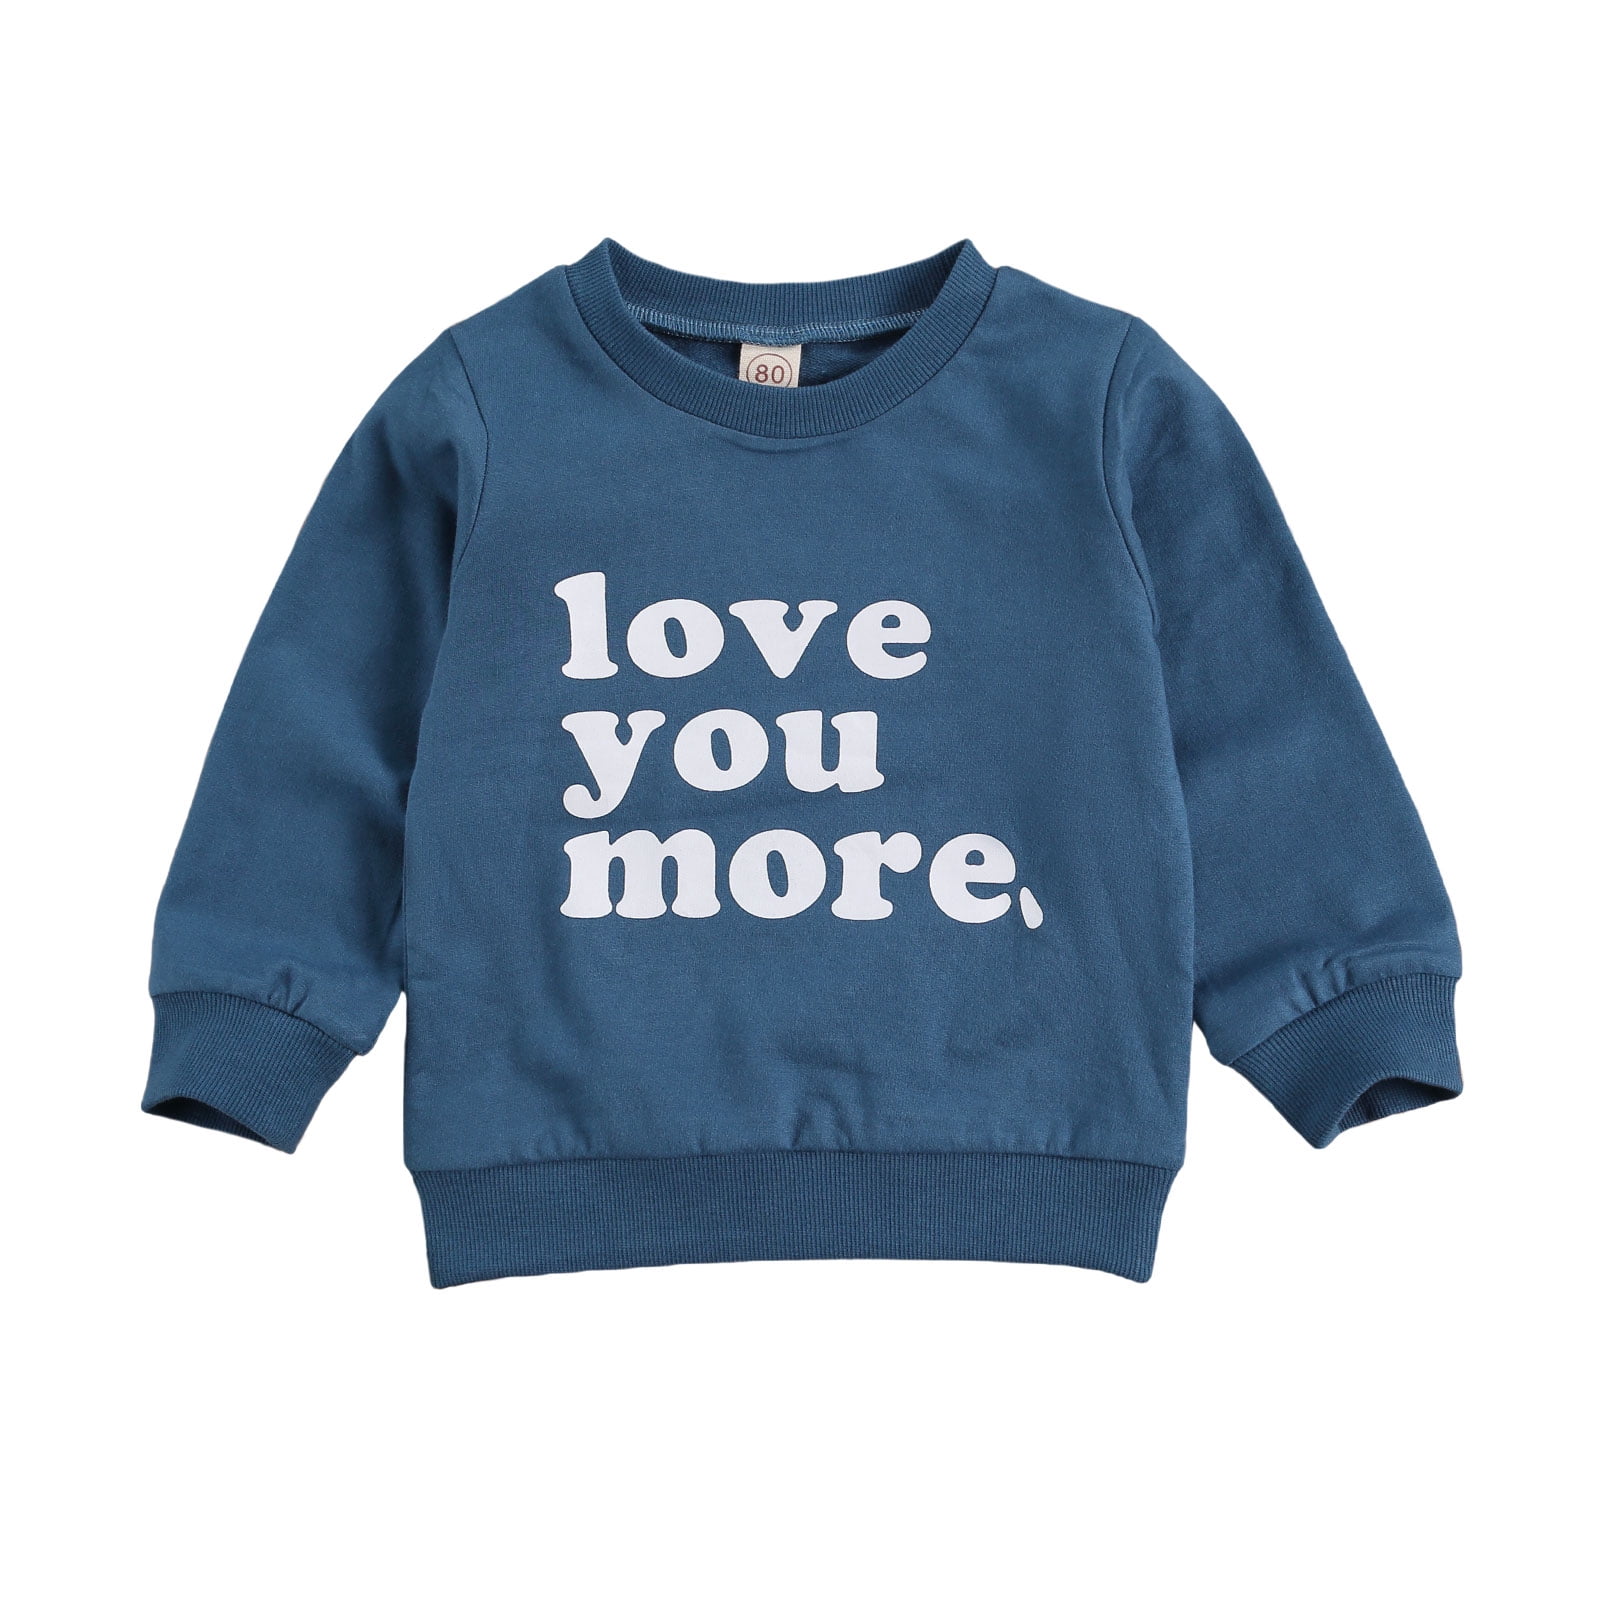 Lucoo Toddler Baby Boy Girl Letter Tops T-Shirt Pullover Sweatshirt+Pants Clothes Set